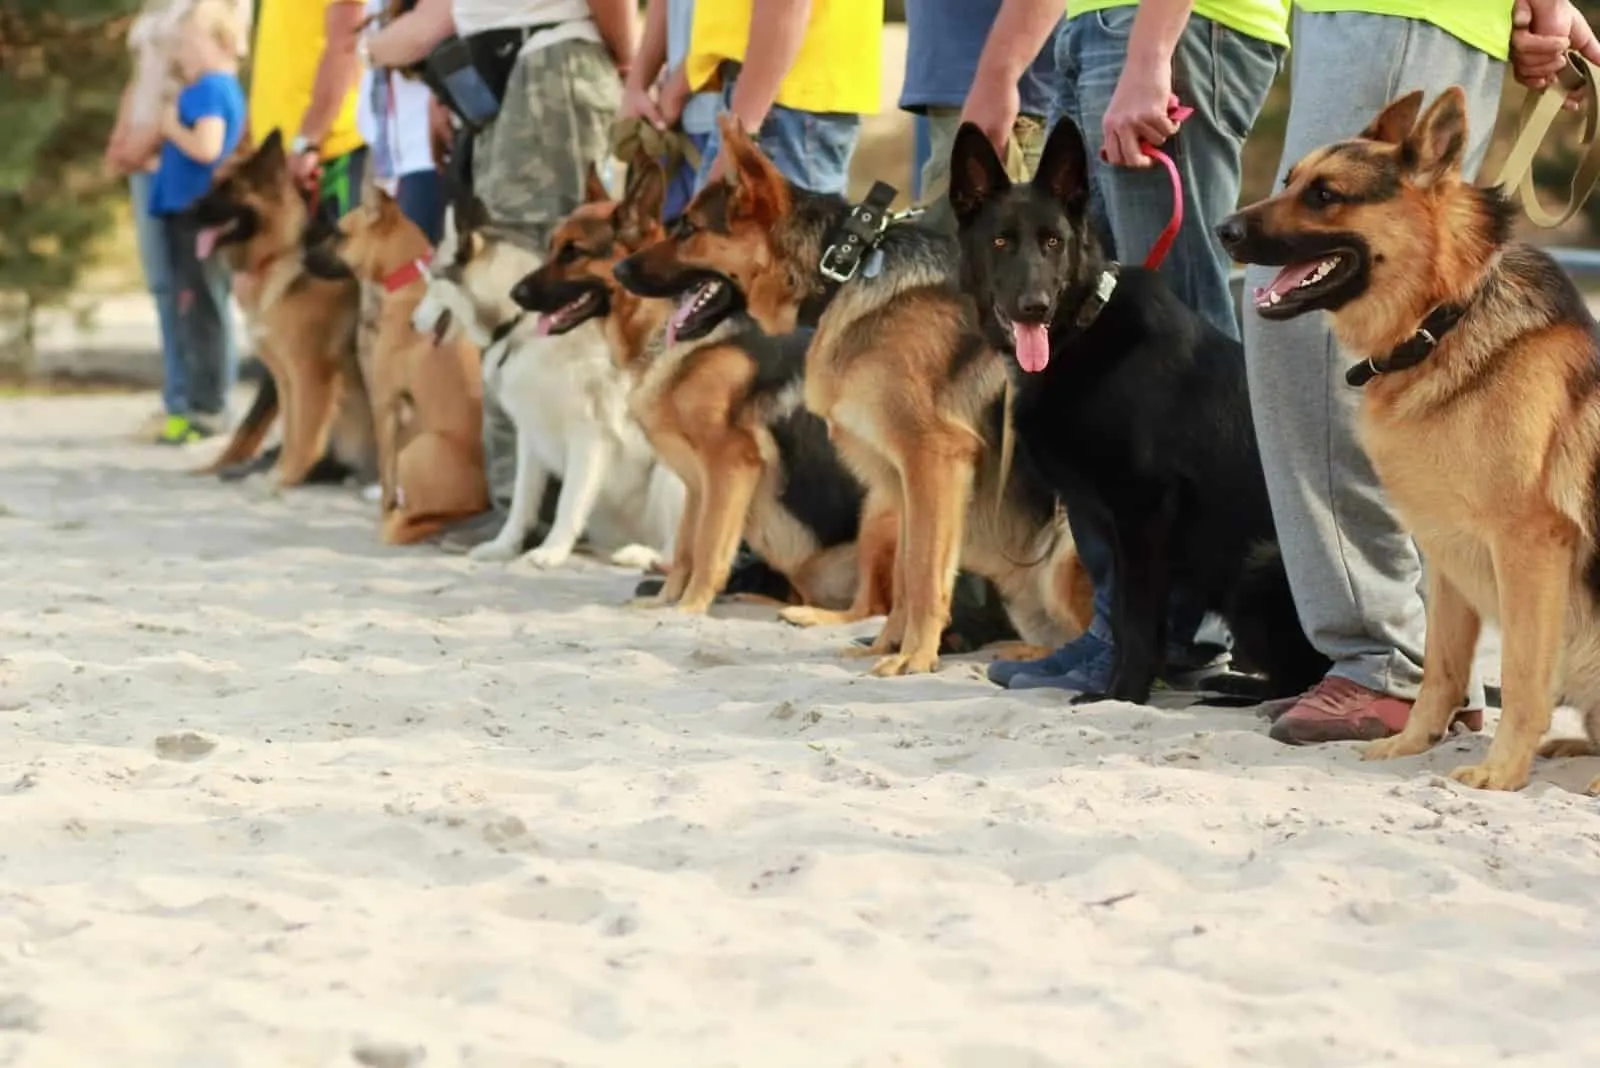 Row of german shepherd dogs on leashes next to their owners at the dog's exhibition